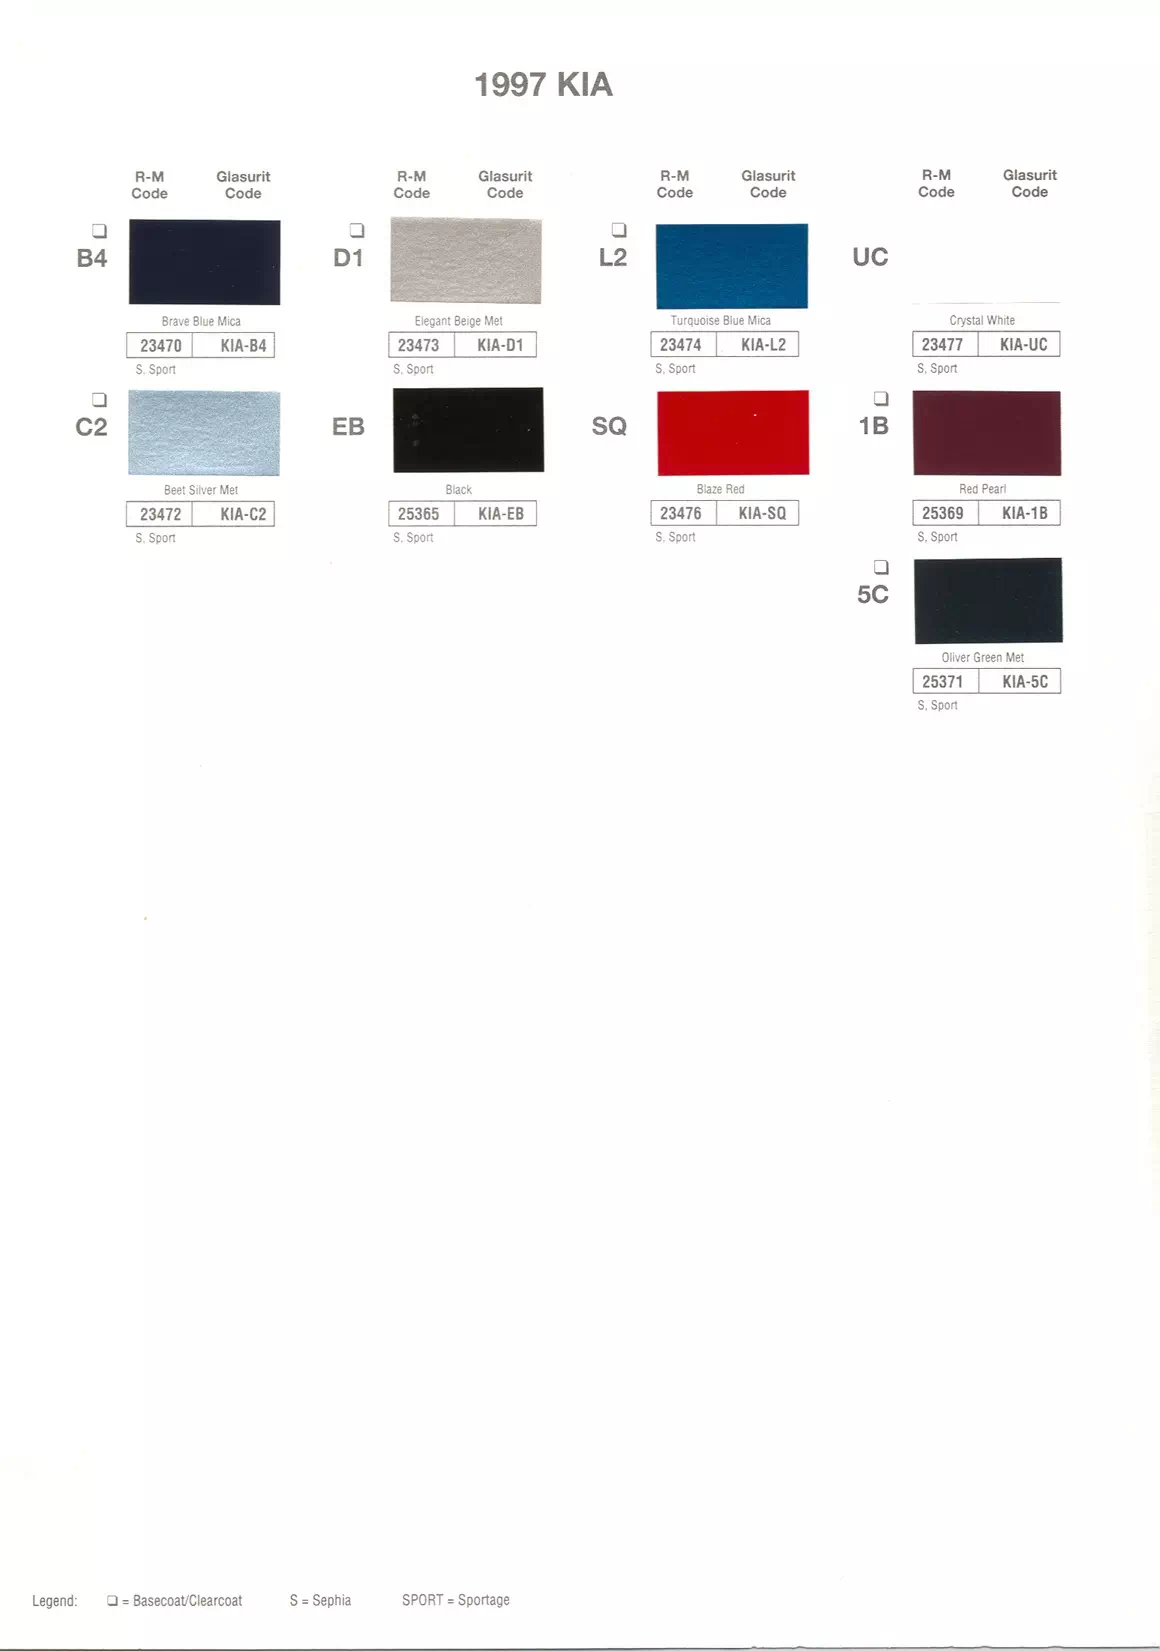 Exterior Colors used on Kia Vehicles in 1997